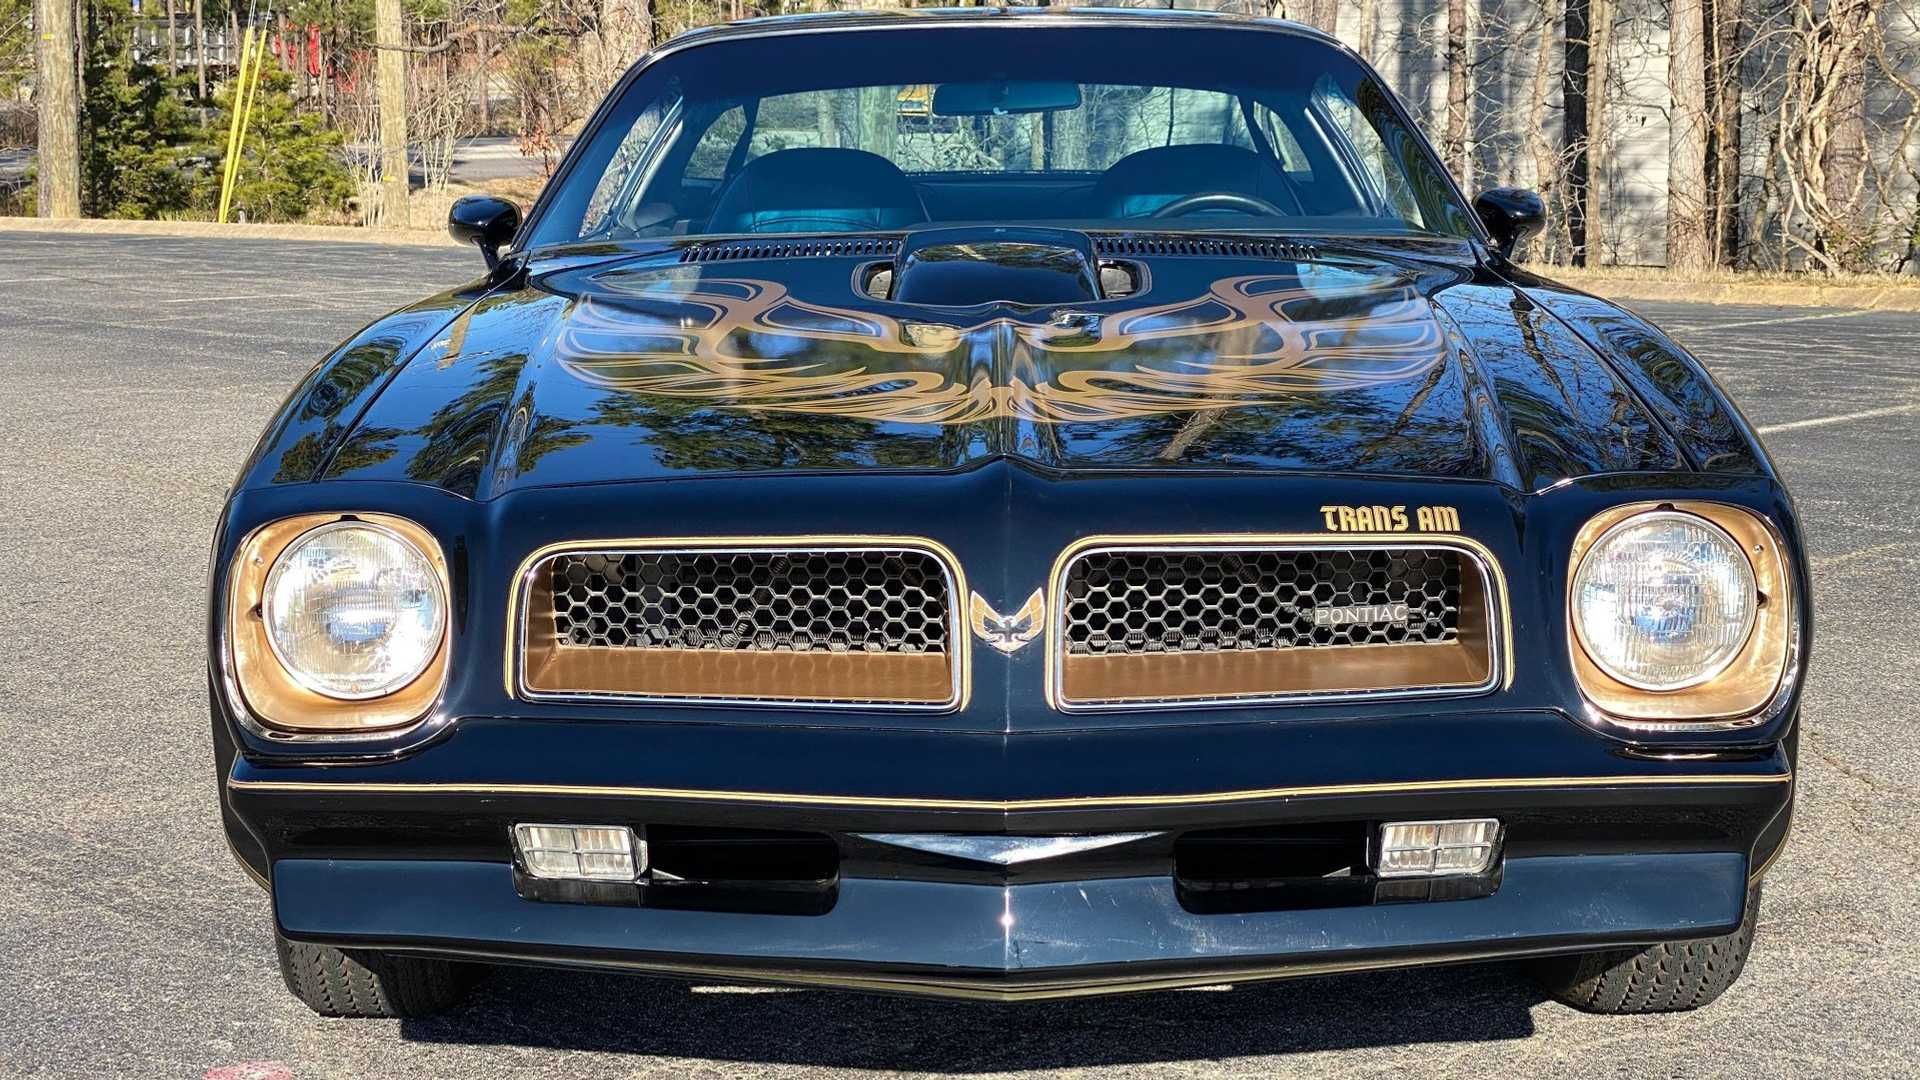 the cars featured in the Smokey and the Bandit Didn't survive